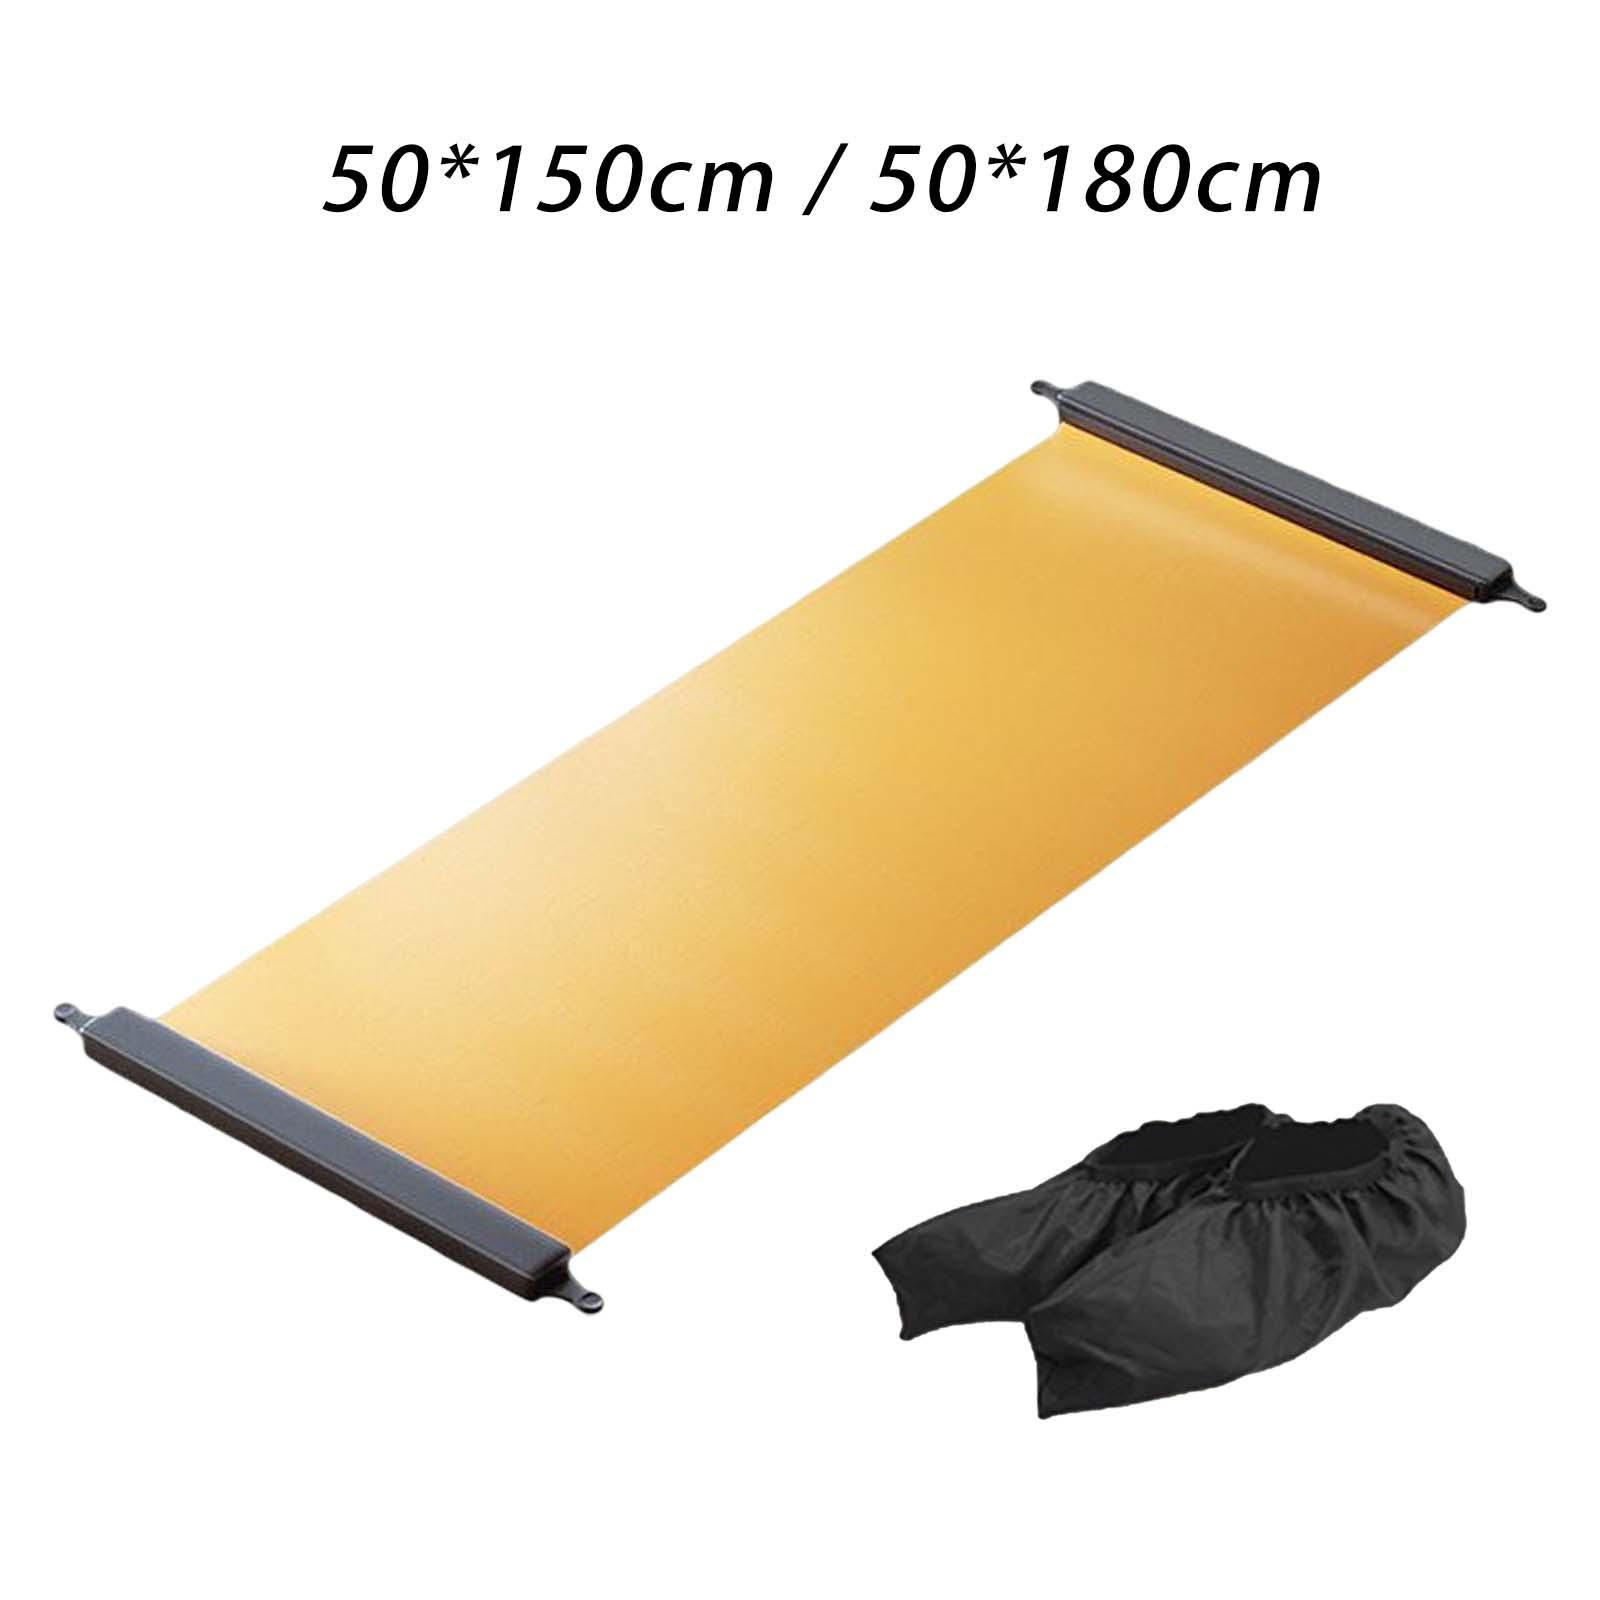 Portable Yoga Sliding Mat with Shoe Cover Workout for Sport Fitness Exercise 50cmx150cm